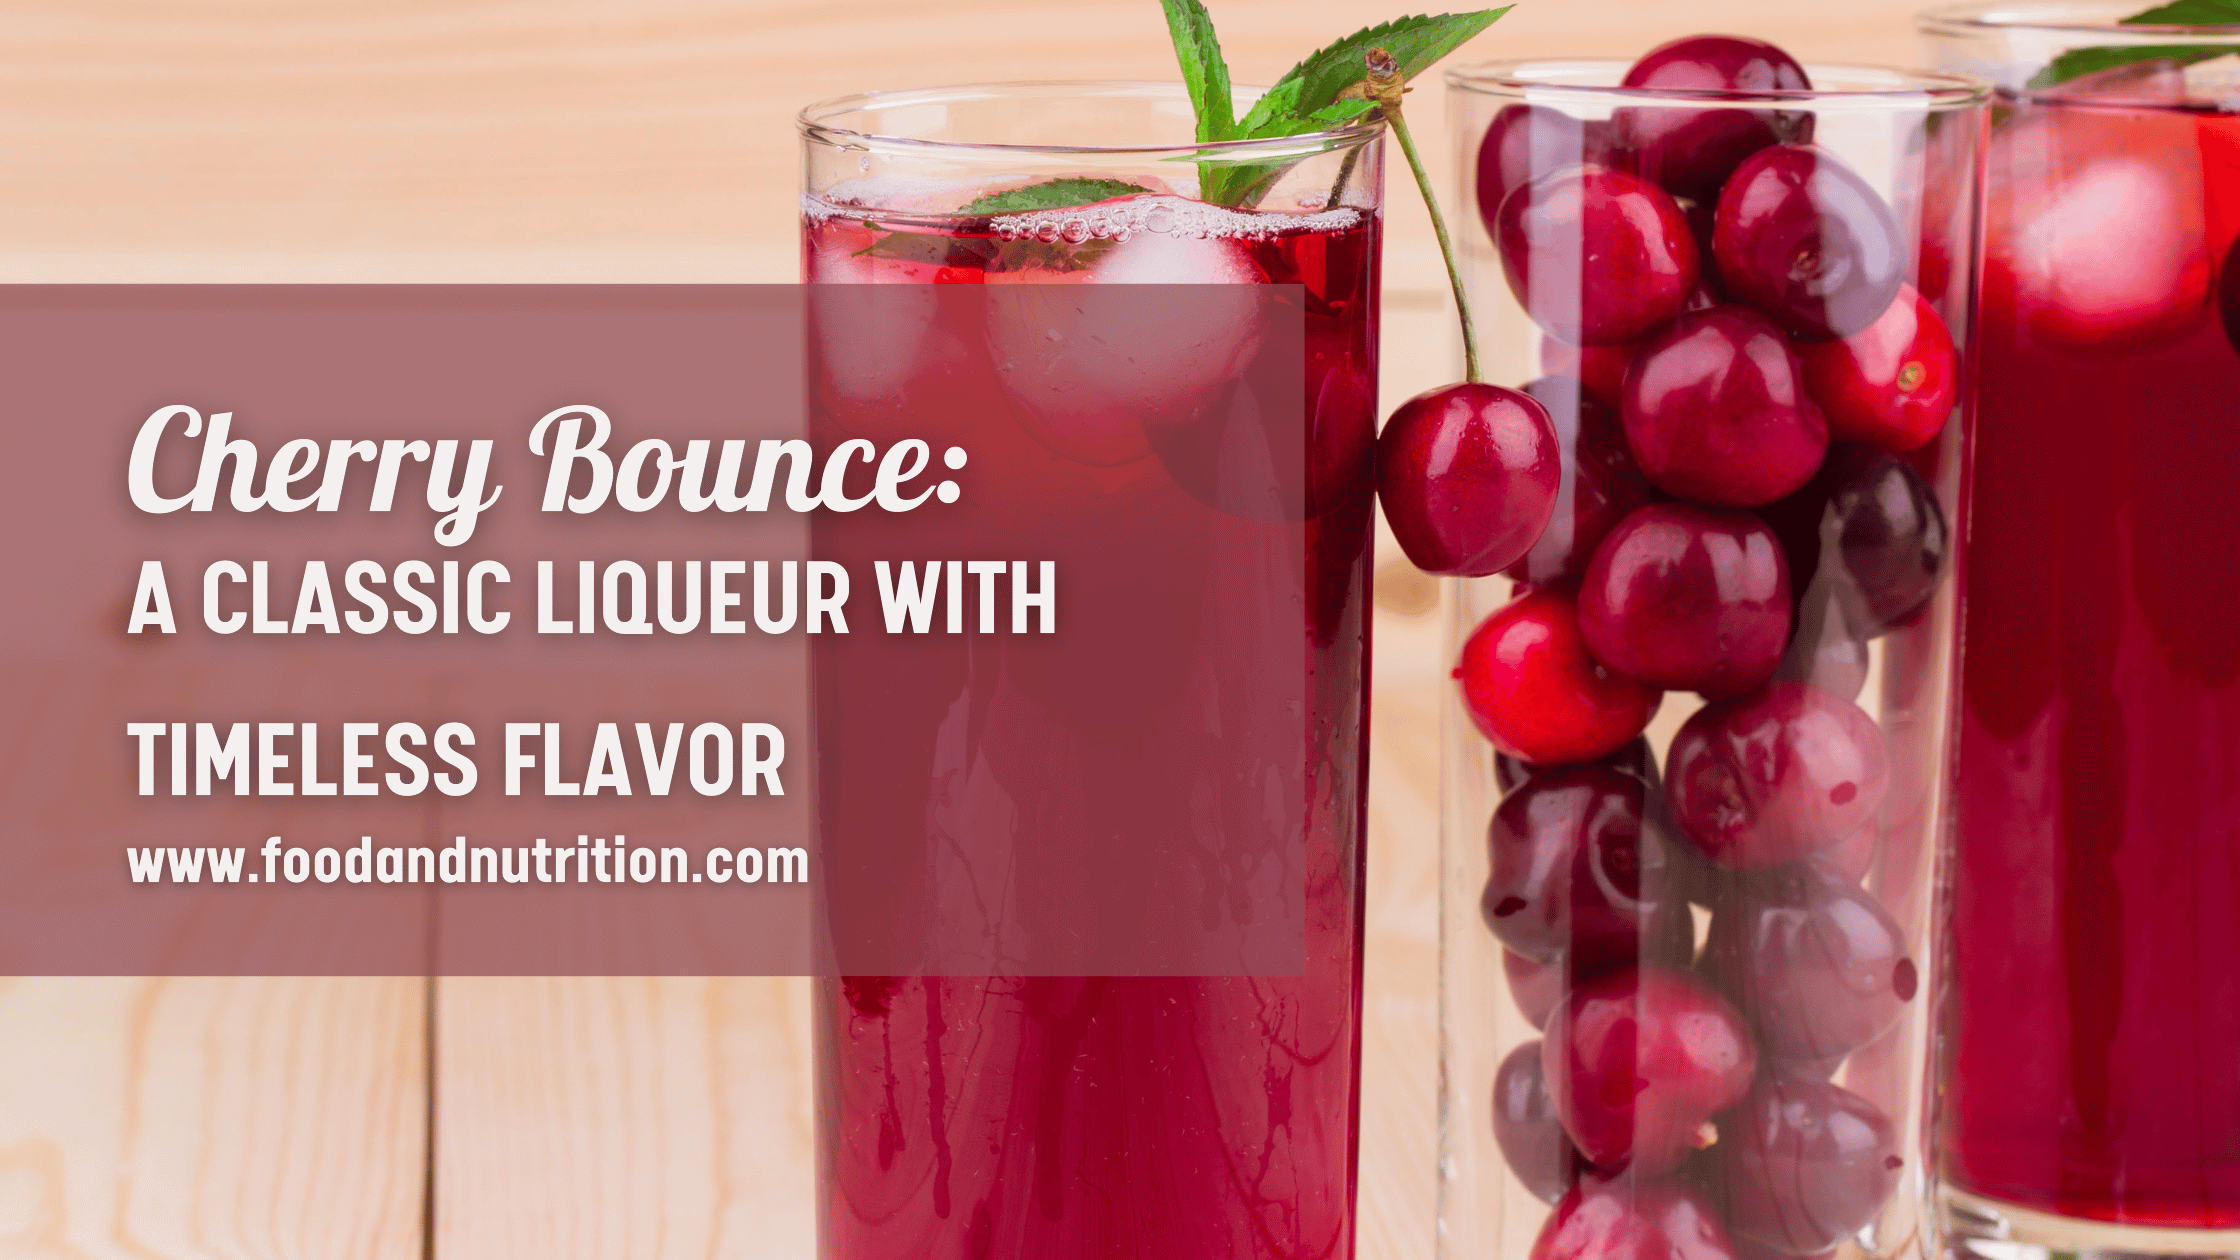 Discover Cherry Bounce: A Timeless Liqueur Delight